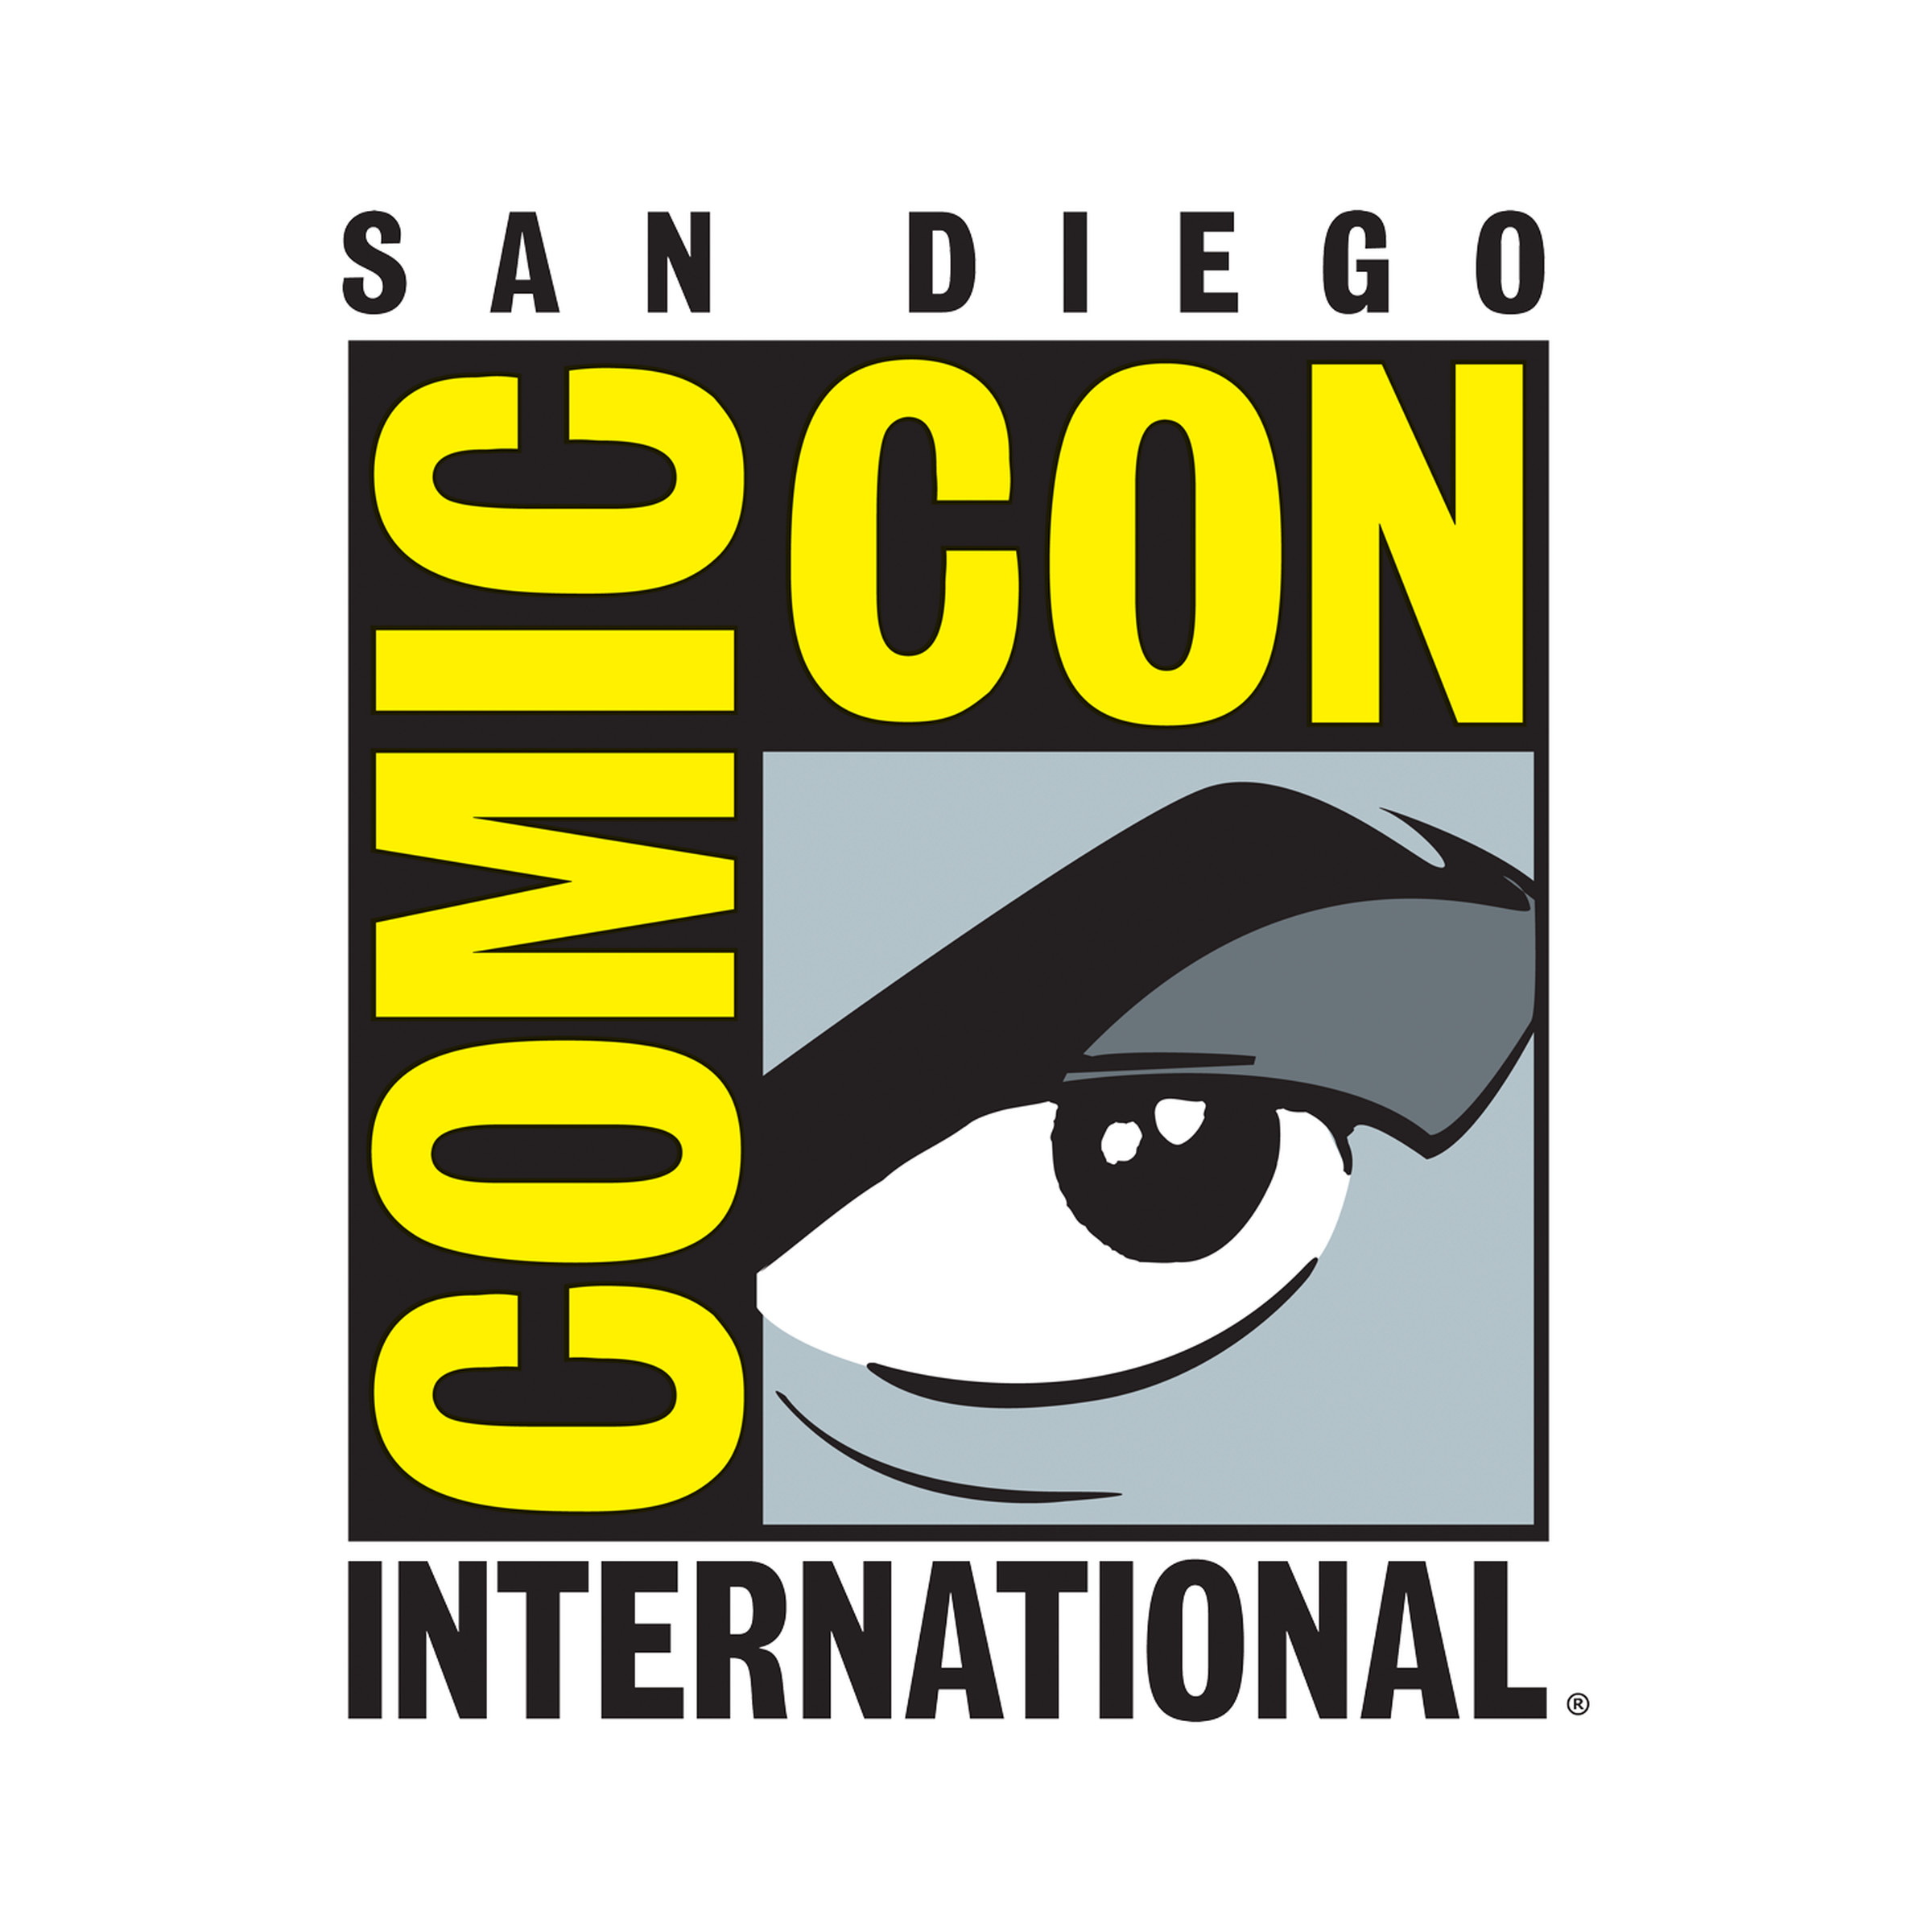 An image of the San Diego Comic Con logo